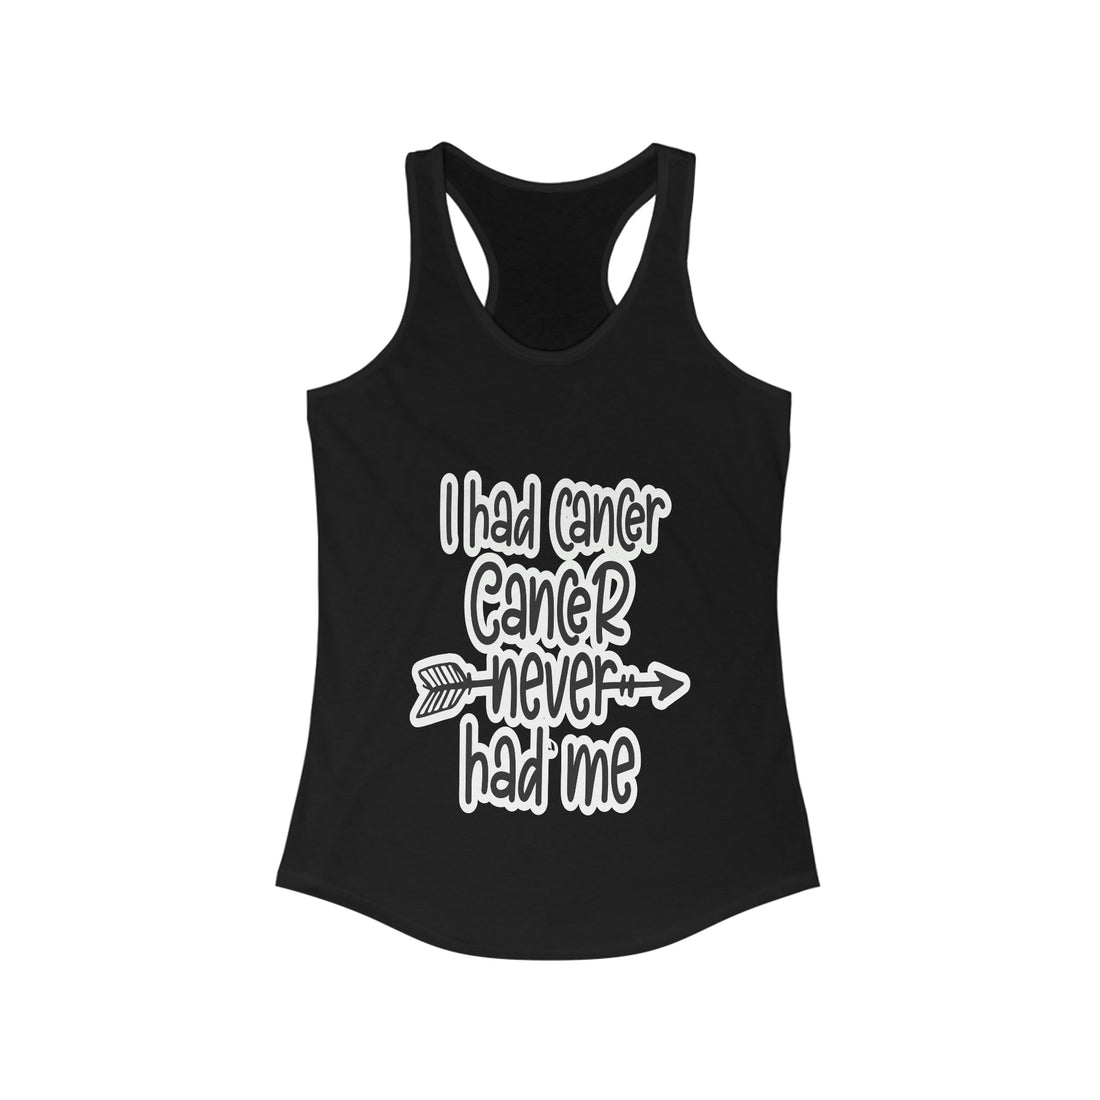 I Had Cancer Cancer Never Had Me - Racerback Tank Top